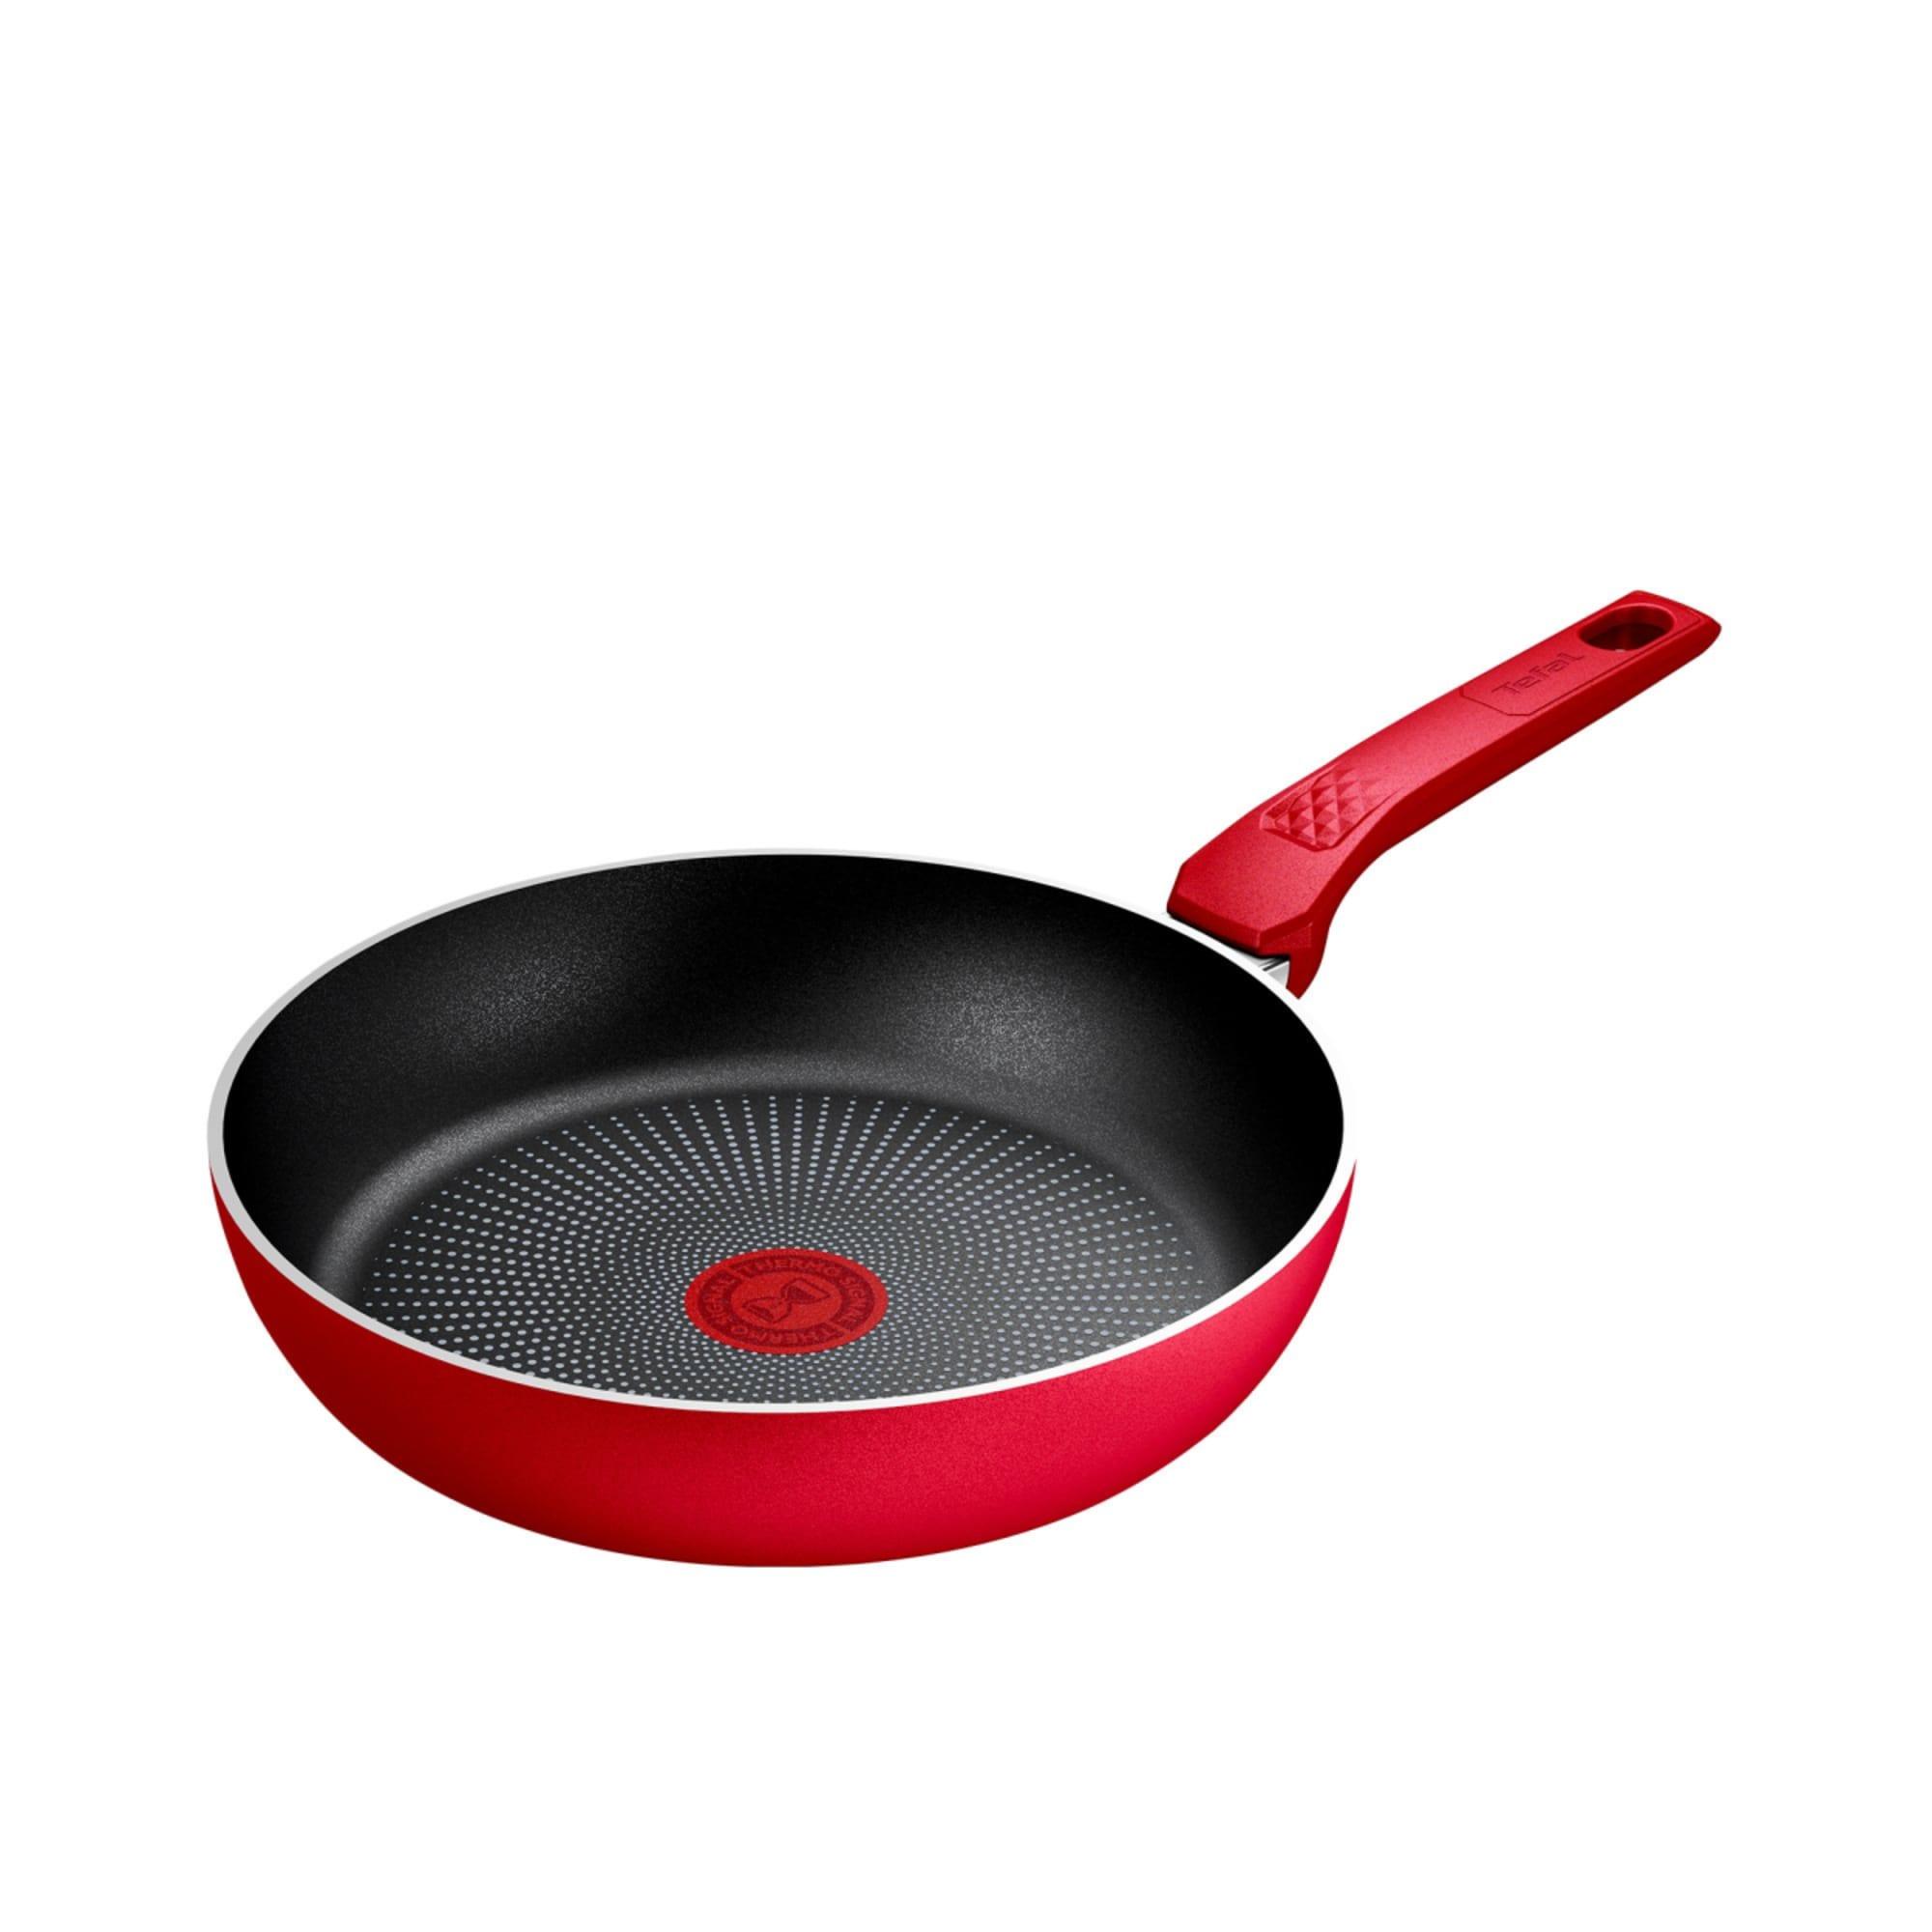 Tefal Daily Expert Frypan 24cm Red Image 1